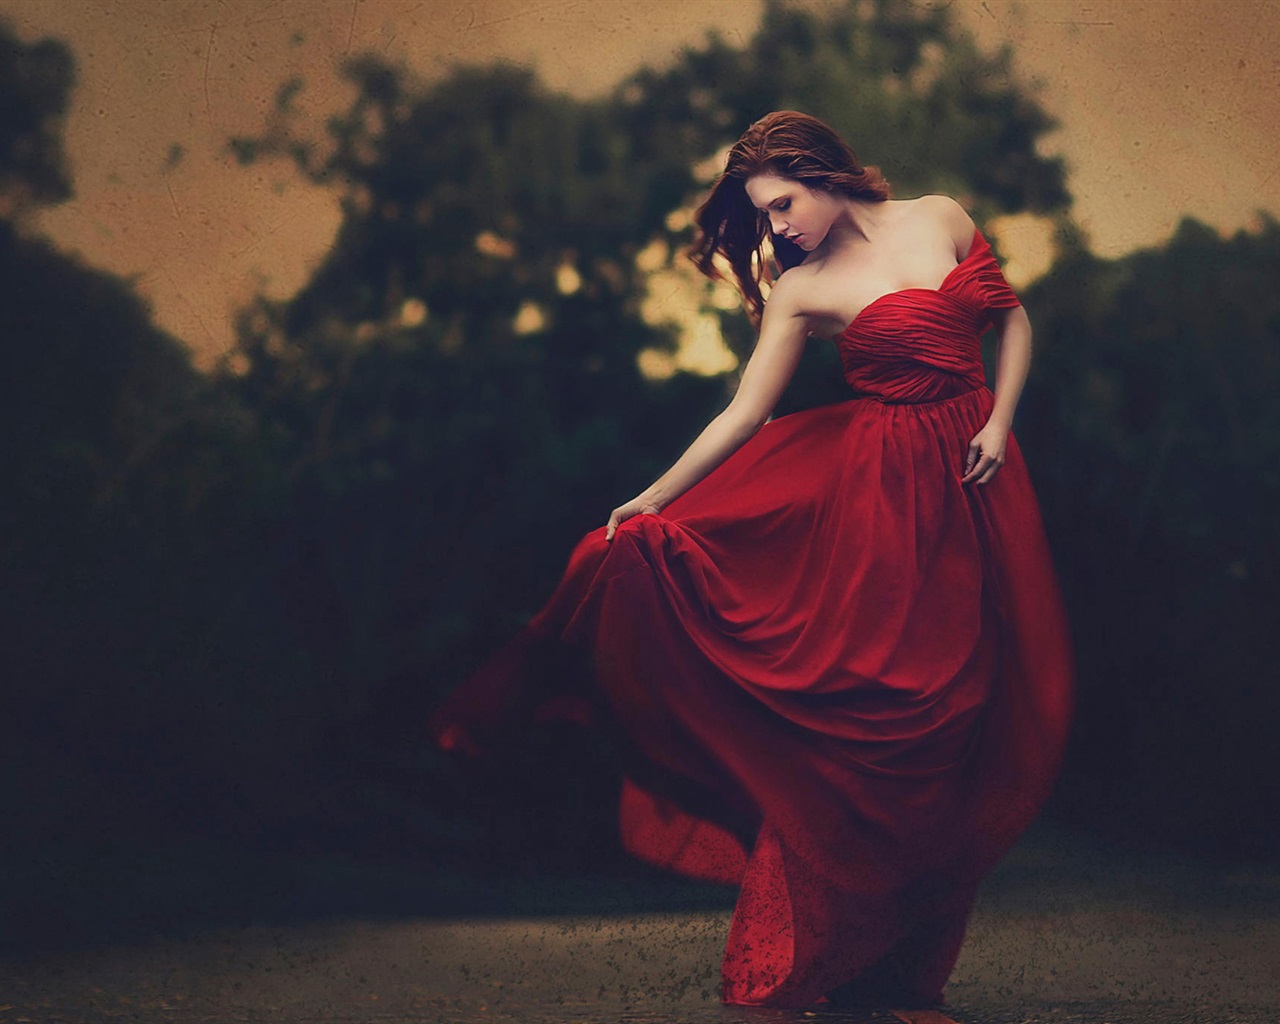 Beautiful Red Dress Girl, Dusk 640x1136 IPhone 5 5S 5C SE Wallpaper, Background, Picture, Image